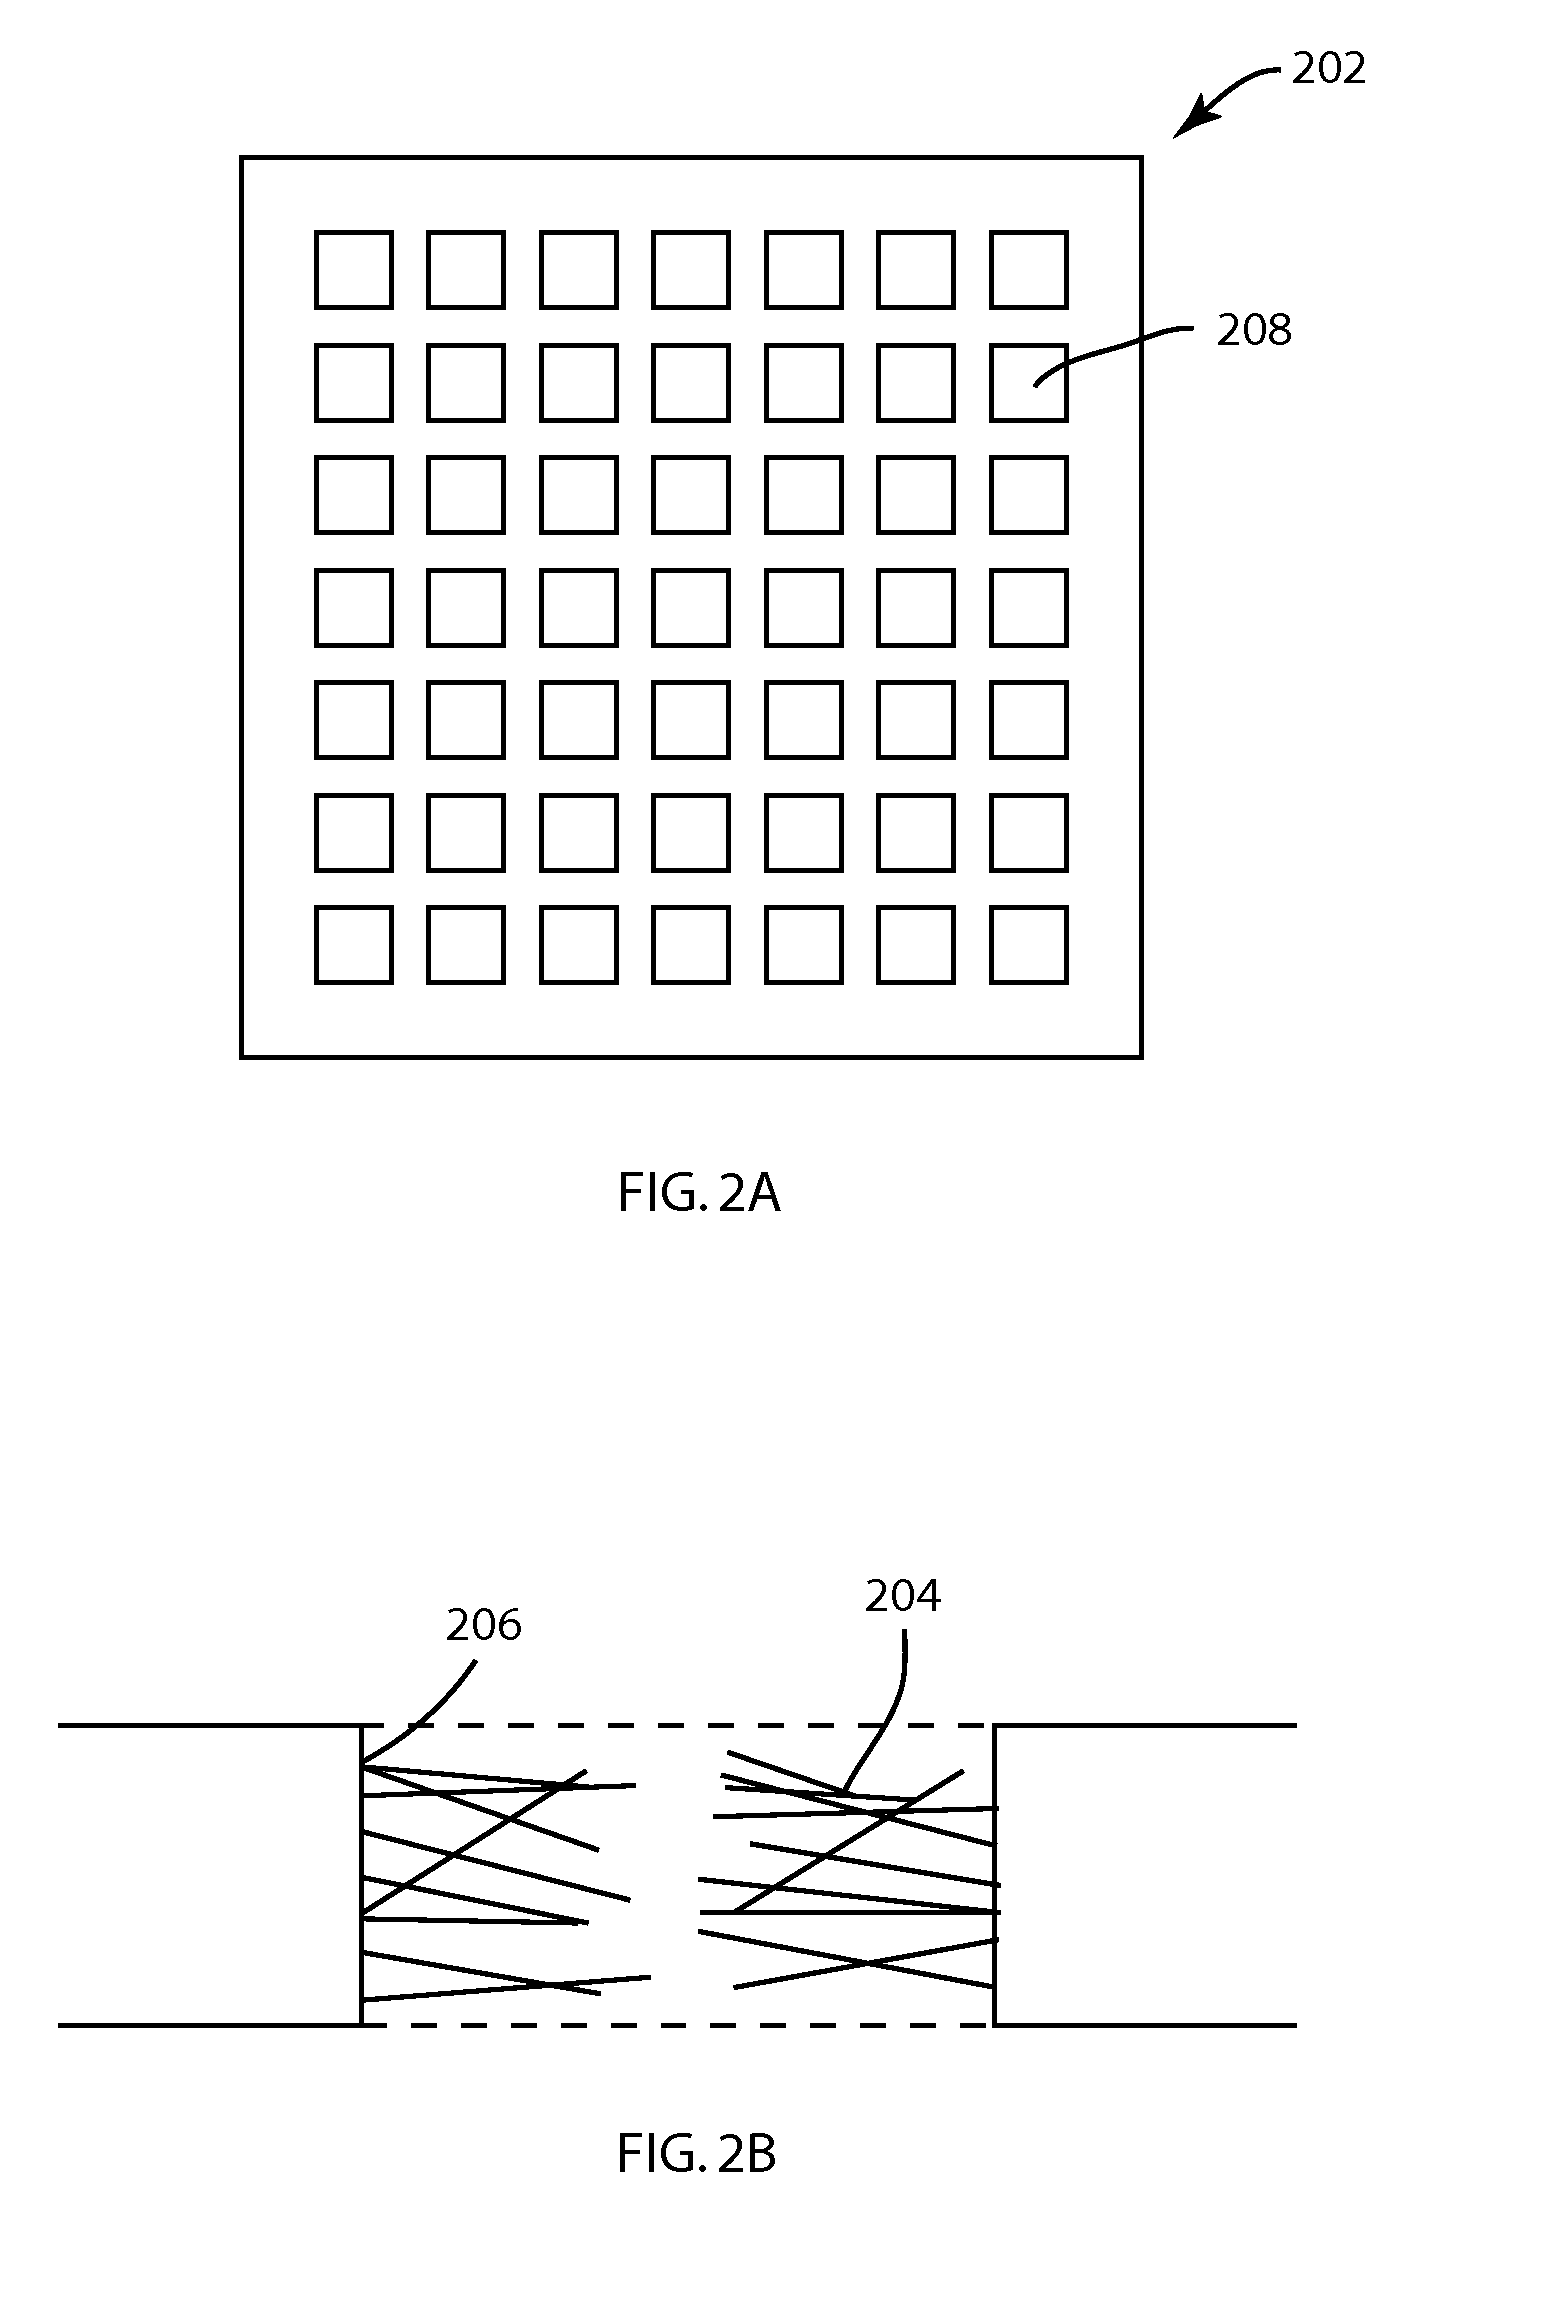 Porous Substrates, Articles, Systems and Compositions Comprising Nanofibers and Methods of Their Use and Production